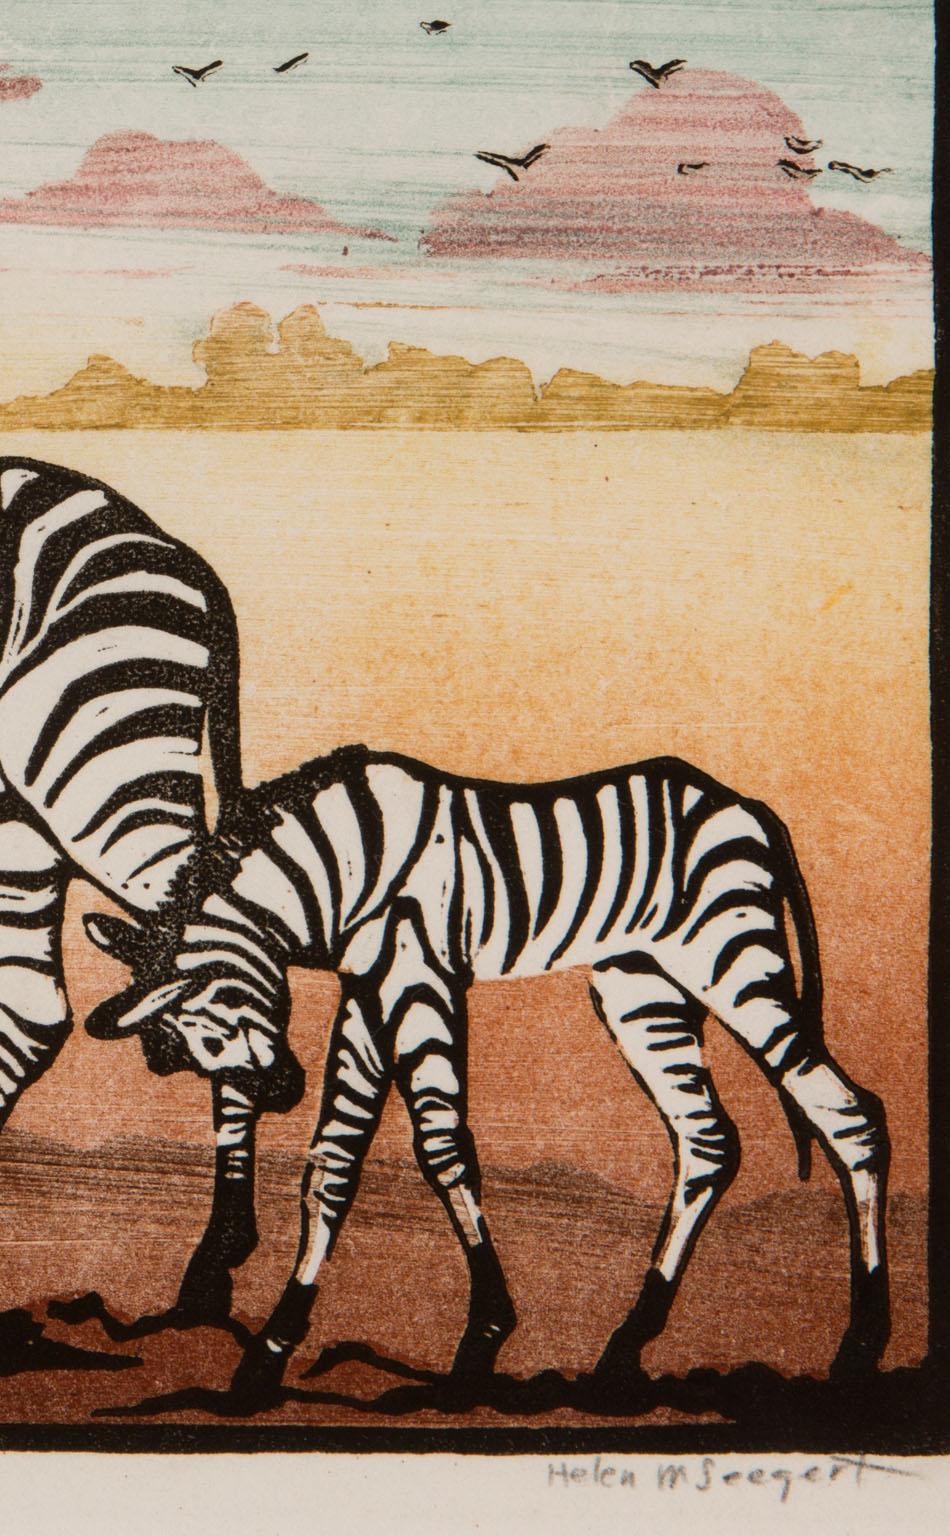 An extremely vibrant and beautiful color woodcut of three zebras on the plains of Africa, Santa Barbara artist Helen Seegert's “African Stripes” (circa 1939) is printed on soft fibrous cream wove paper and is signed “Helen M. Seegert” in the margin